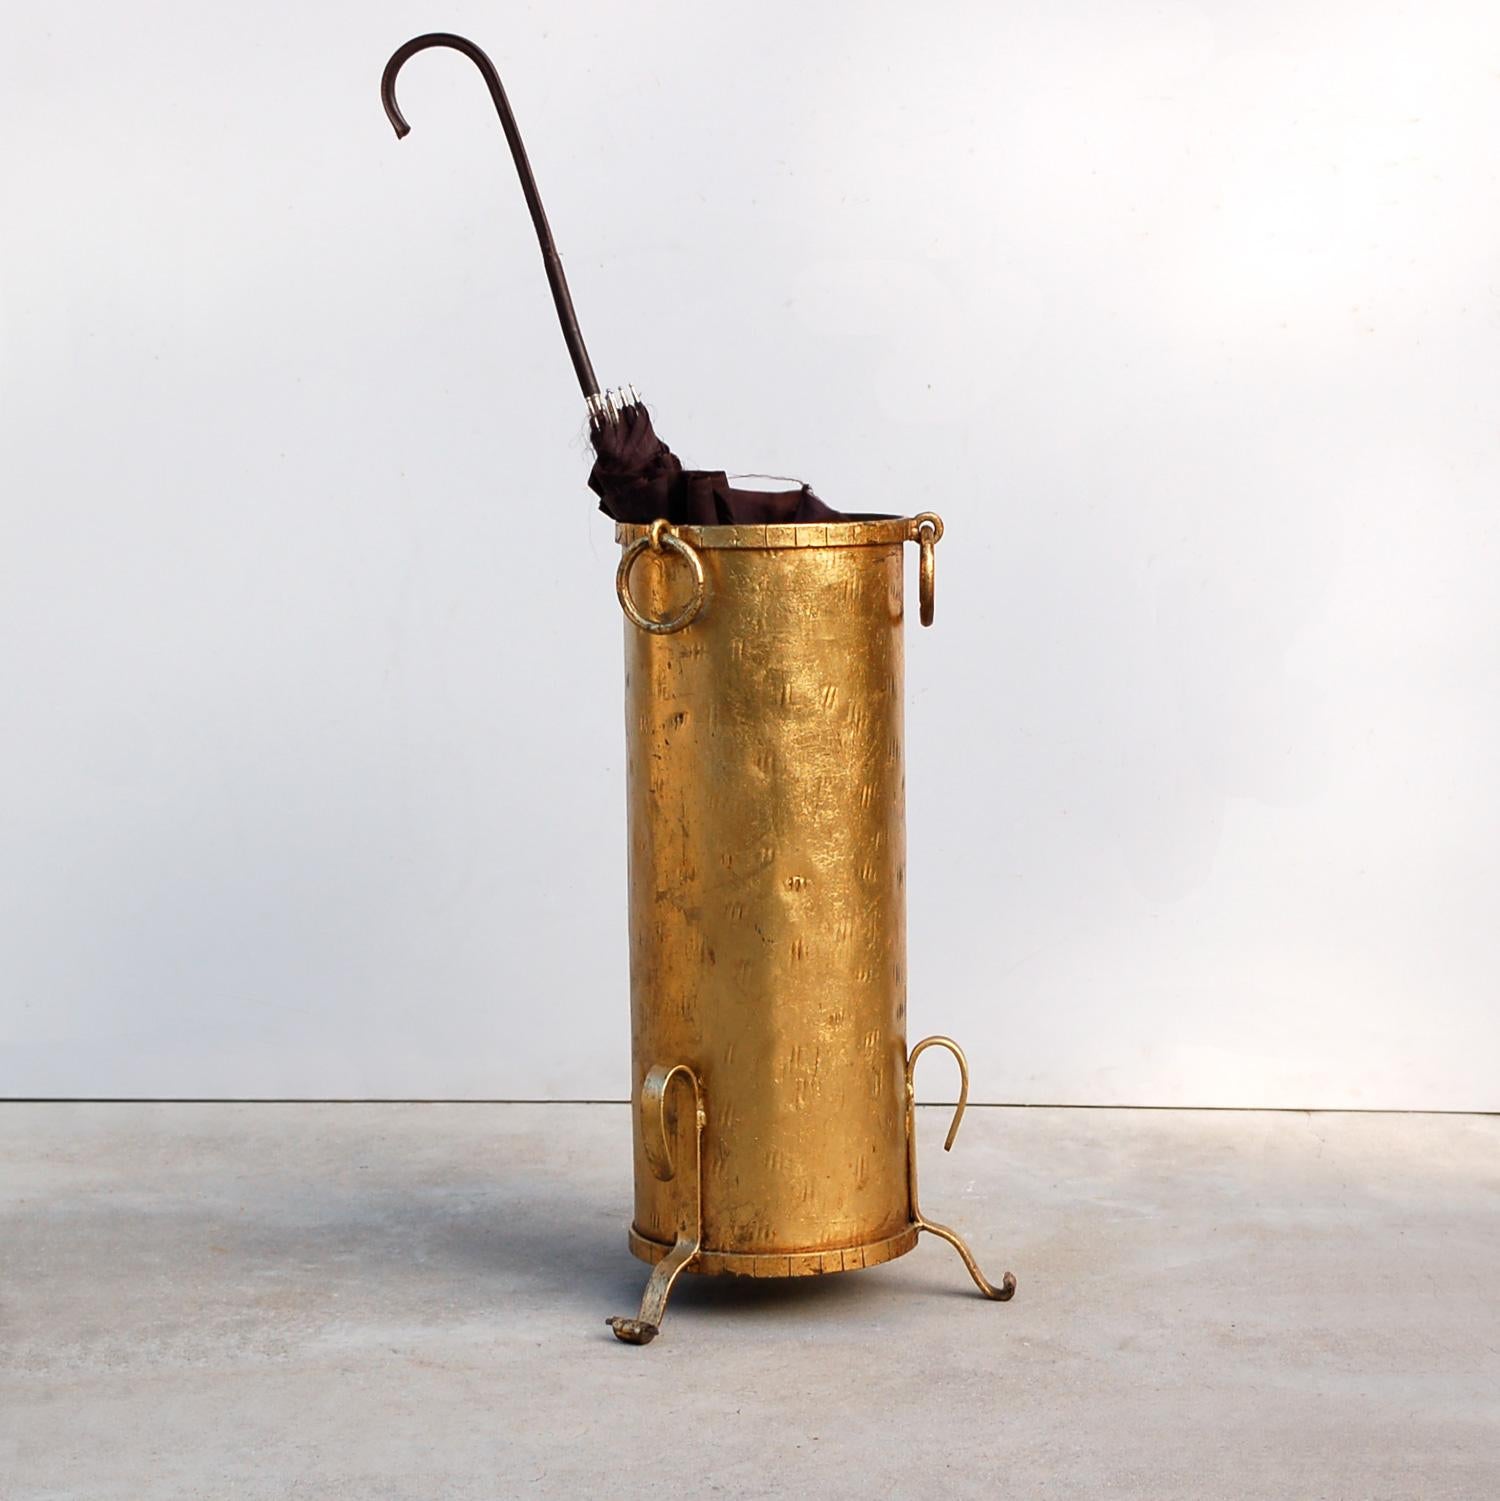 Late 20th century gold colored, gilt, gilded umbrella or stick stand in a rustic, country, farmhouse style with a hint of Hollywood Regency flair due to the gold finish. The metalwork has been lightly hammered for decorative effect with banding on